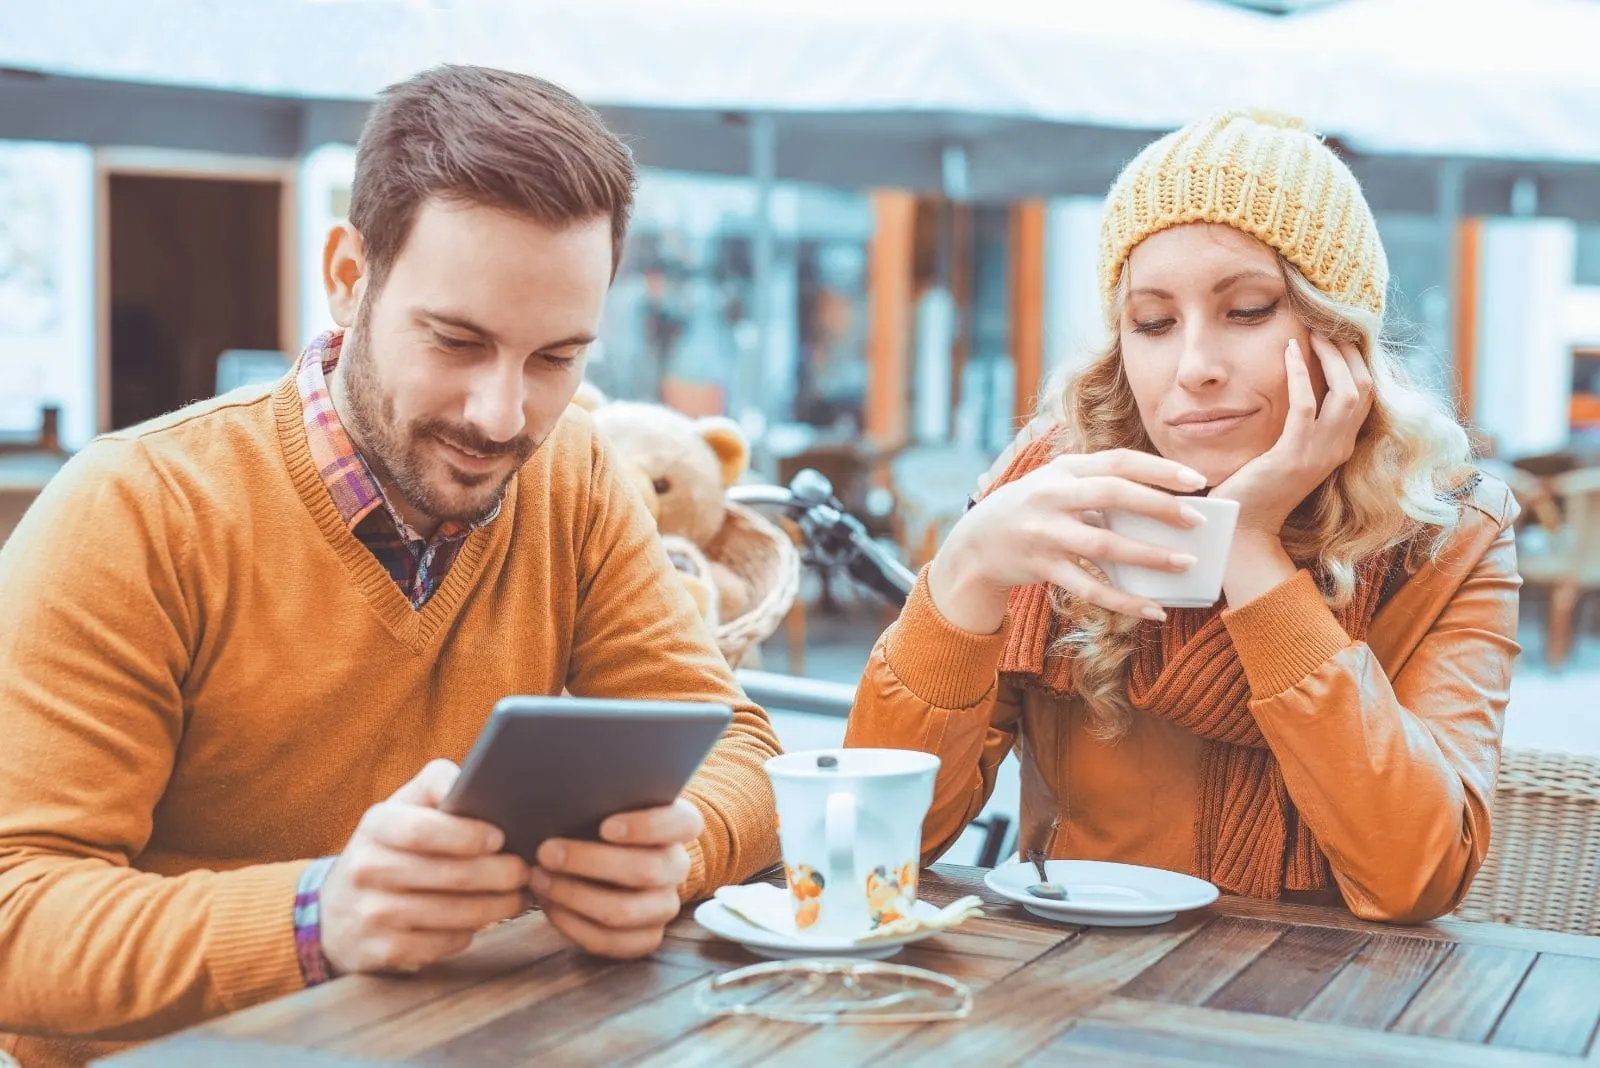 young woman looks suspicious while boyfriend is texting on smartphone while having coffee in an outdoor cafe